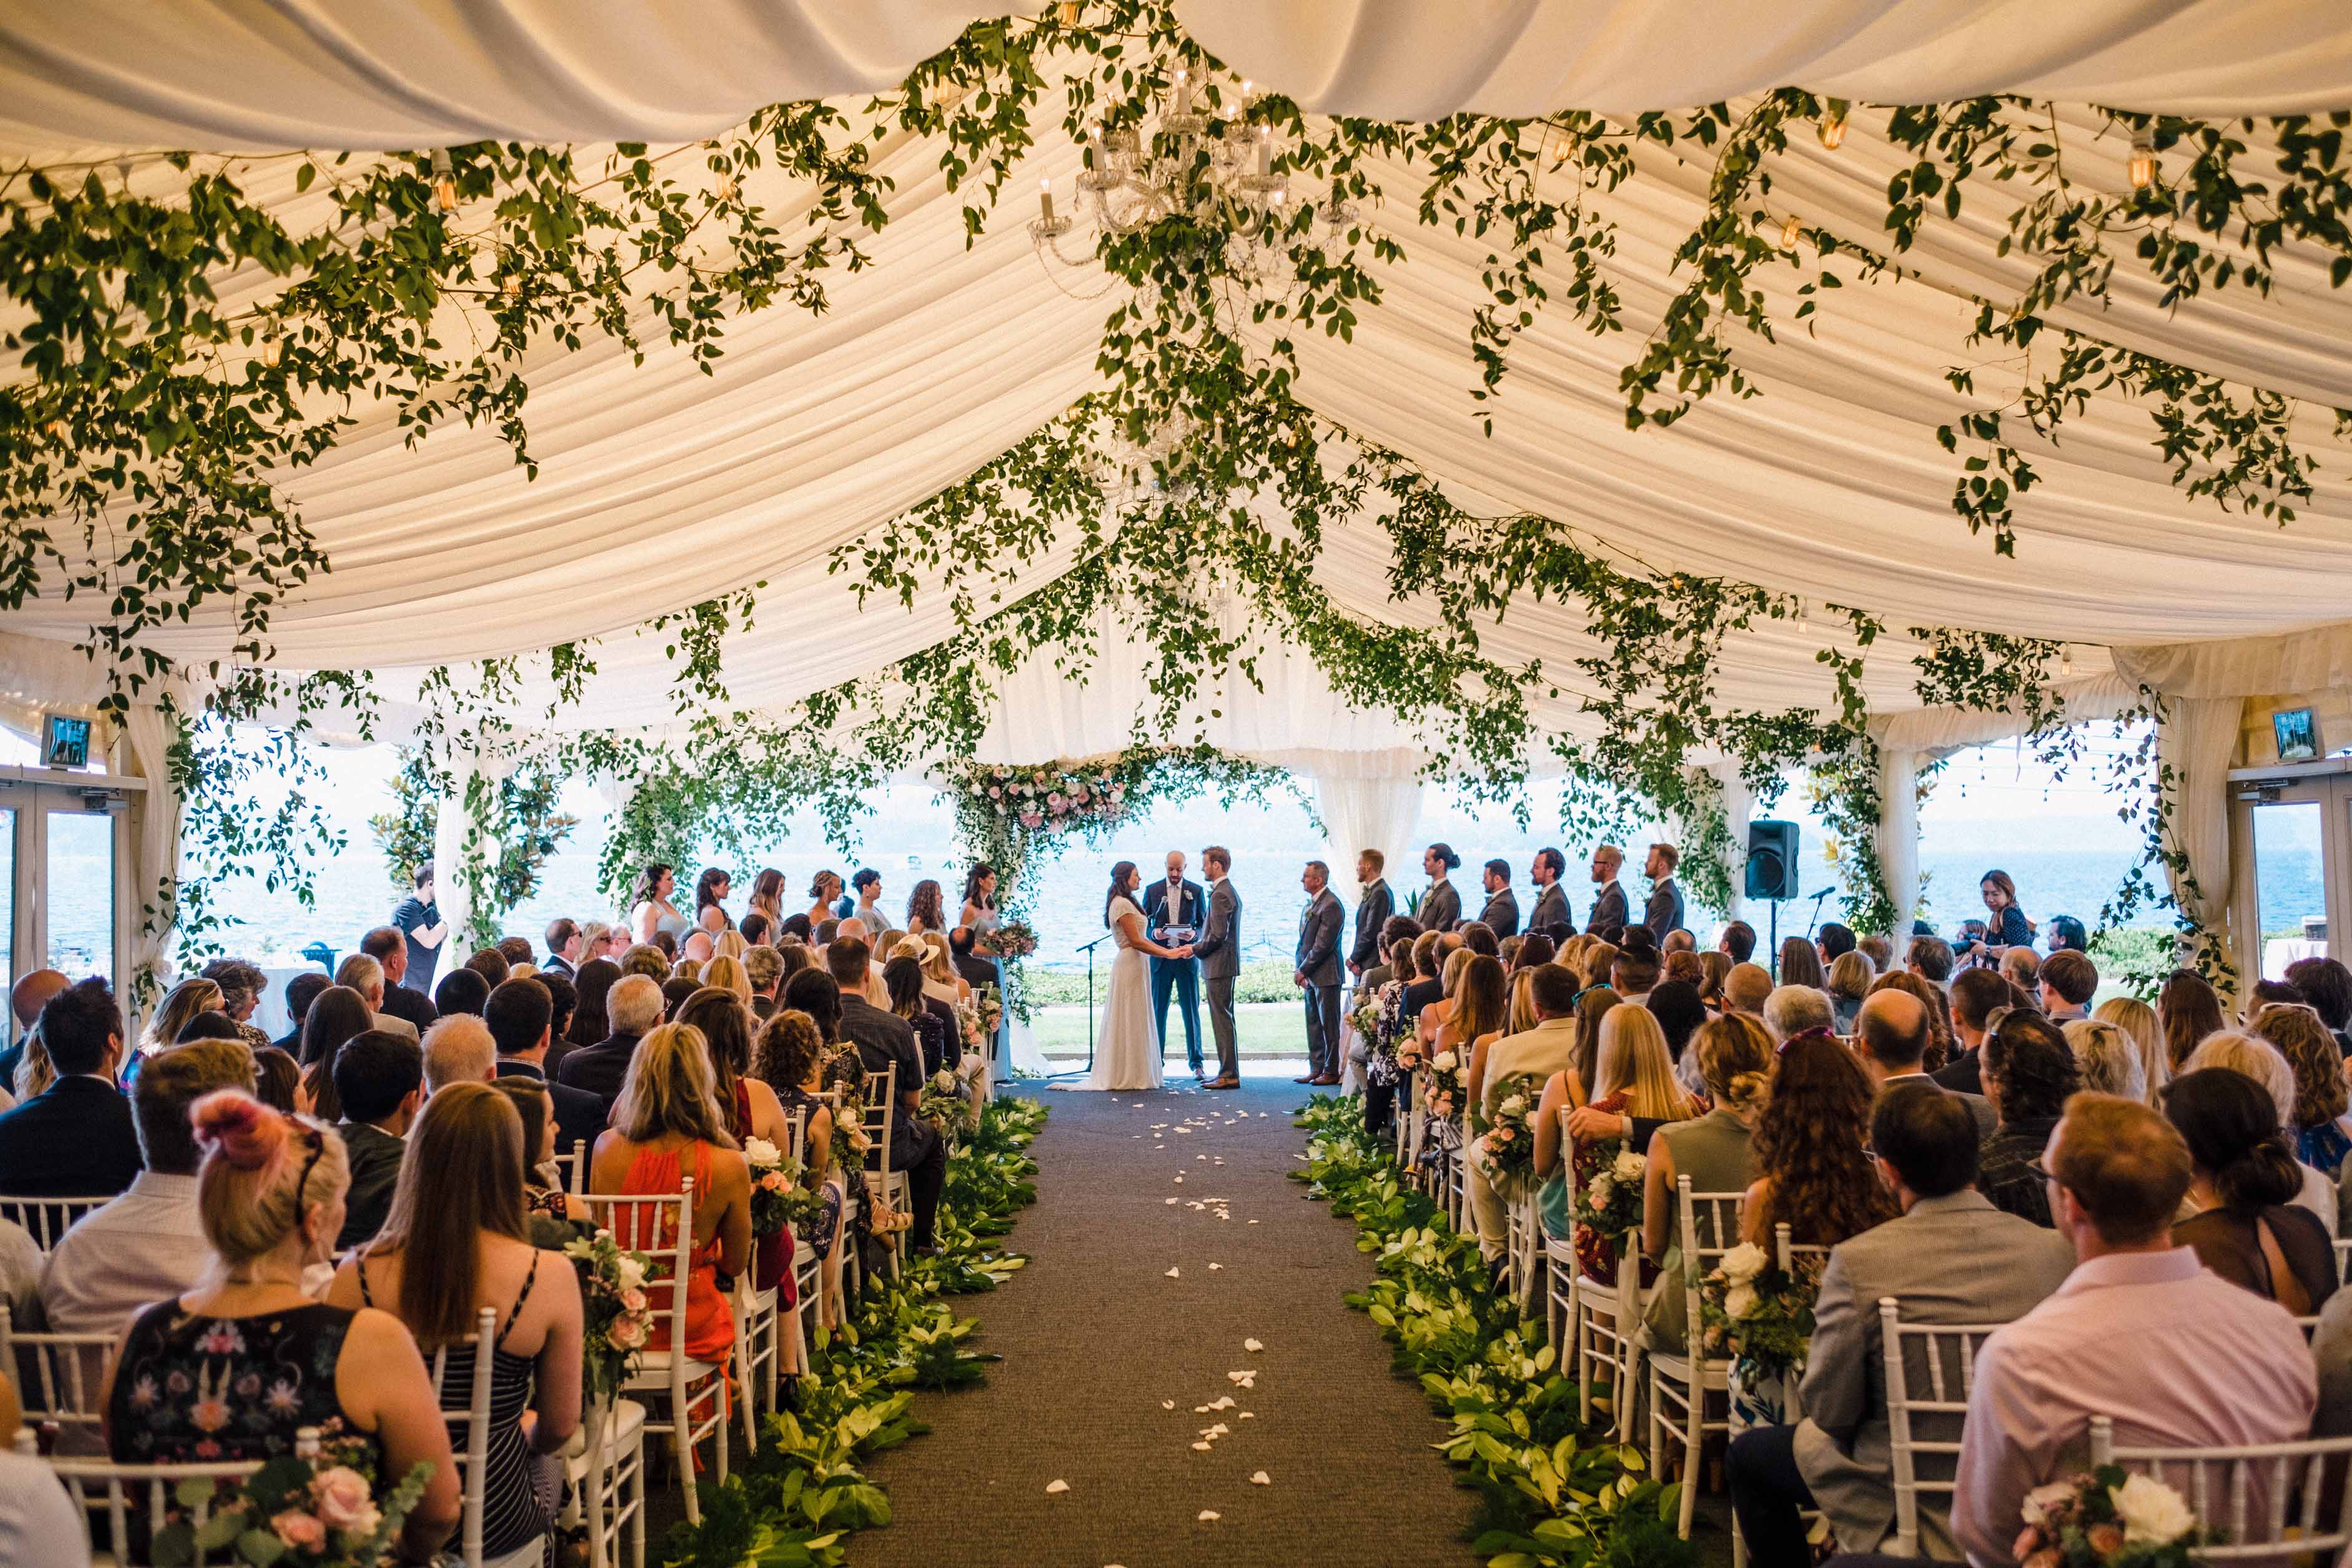 Wedding ceremony with lots of greenery in the tent ceiling at a Woodmark Hotel wedding, Flora Nova Design Seattle